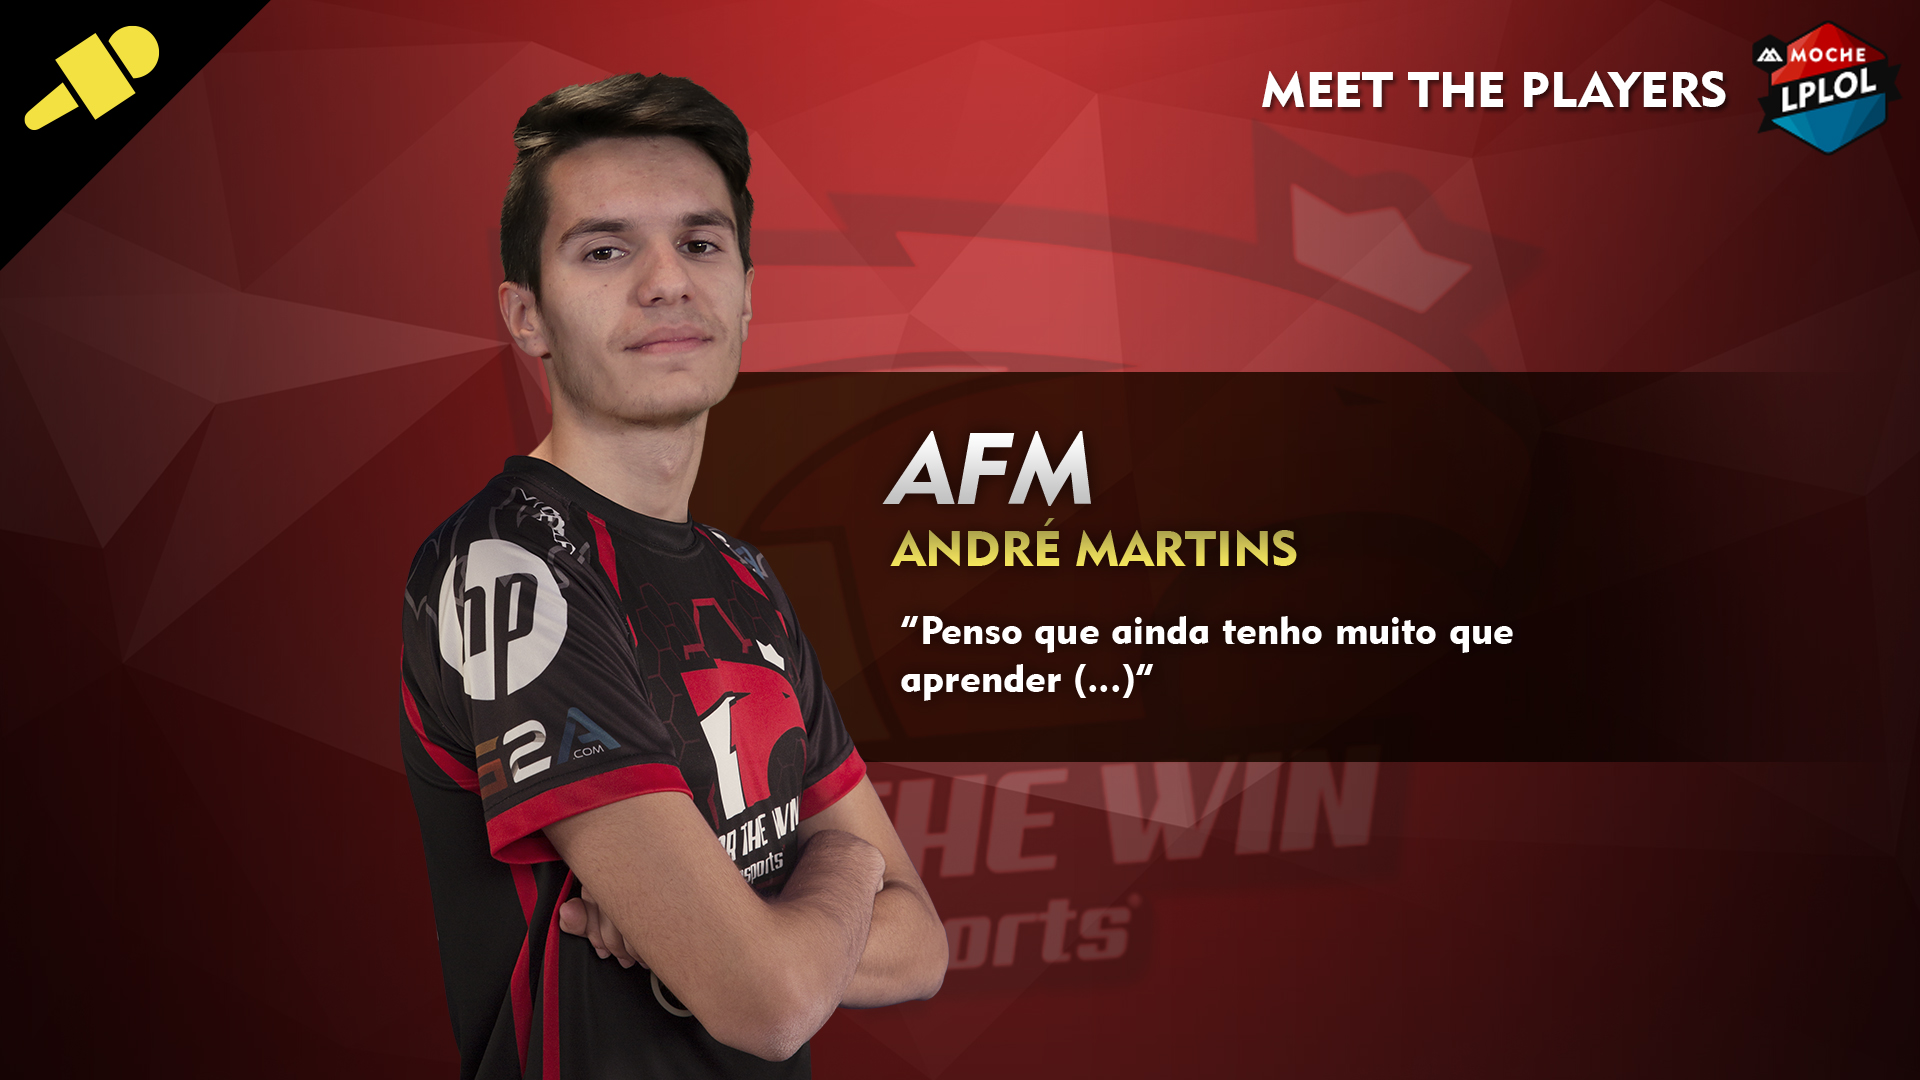 Meet The Players: Afm